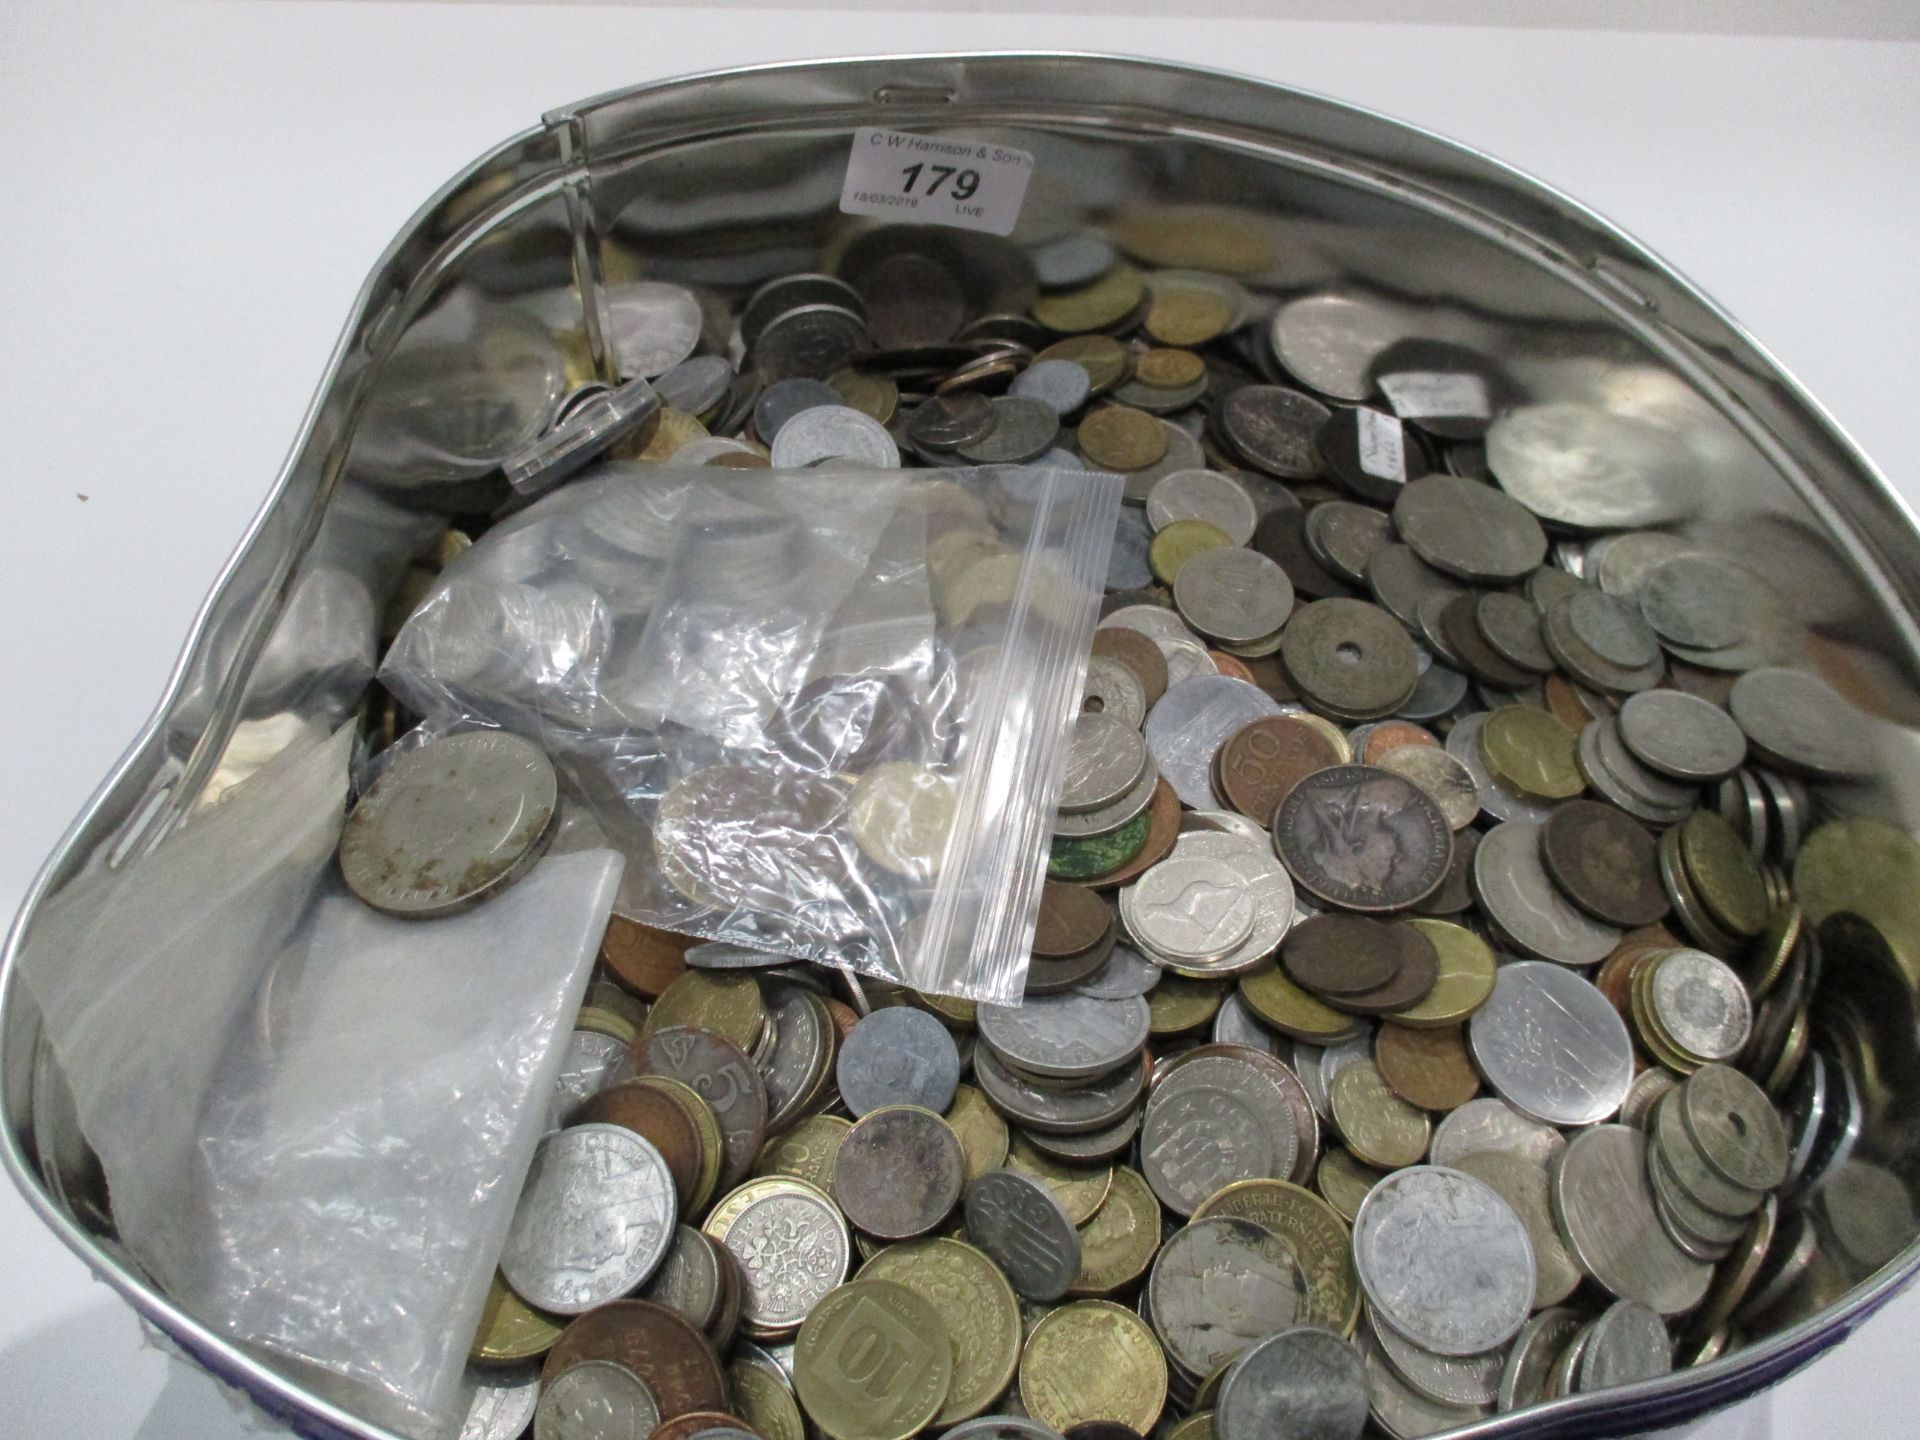 Contents to large tin - a large quantity of world coins